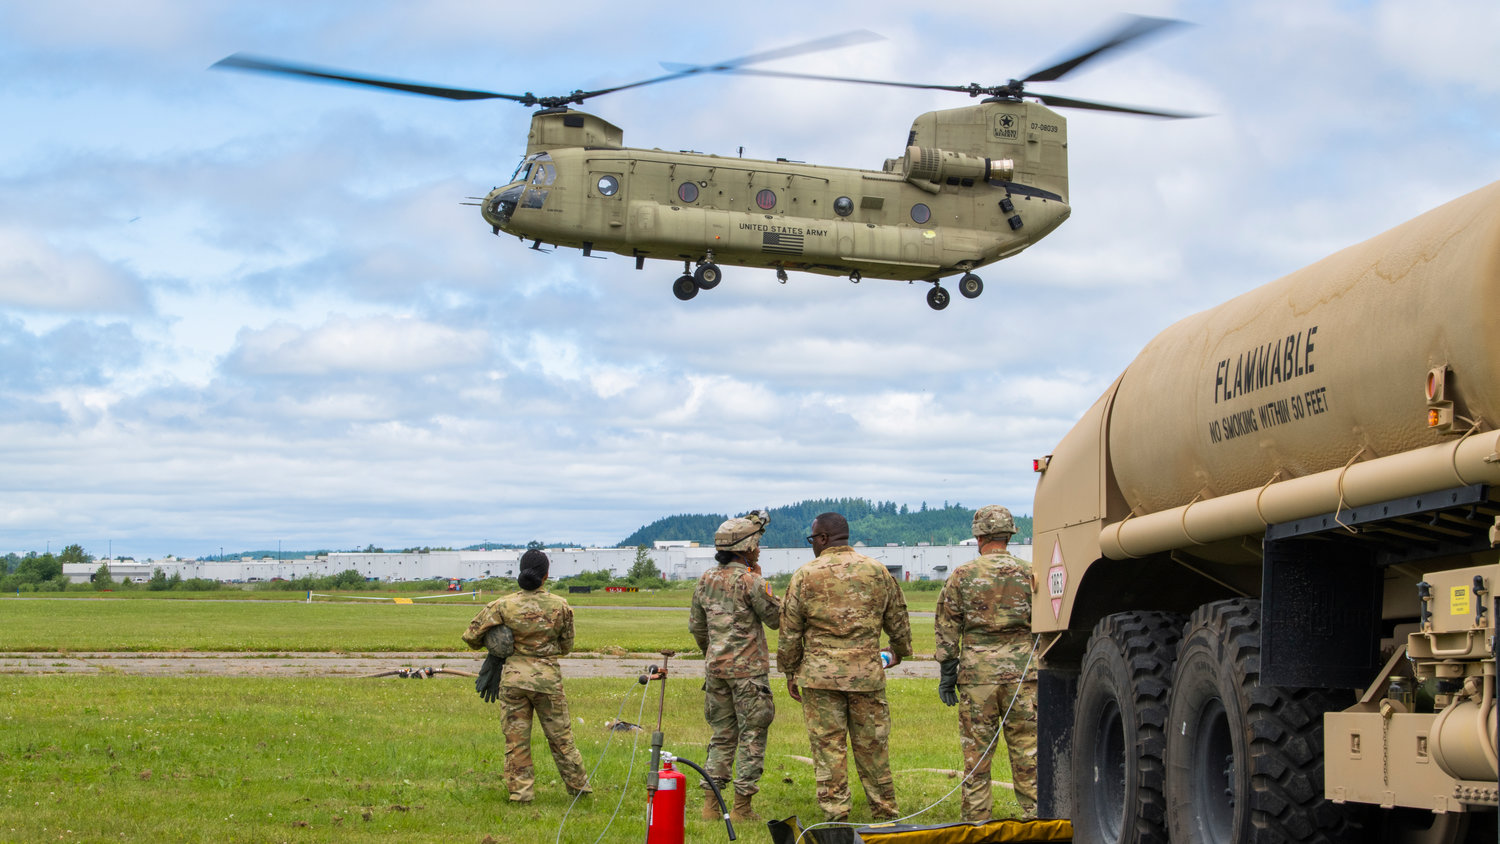 Members of the United States Army from Joint Base Lewis-McChord watch as a Chinook helicopter prepares to land at the Chehalis-Centralia Airport during a military training exercise on Wednesday.